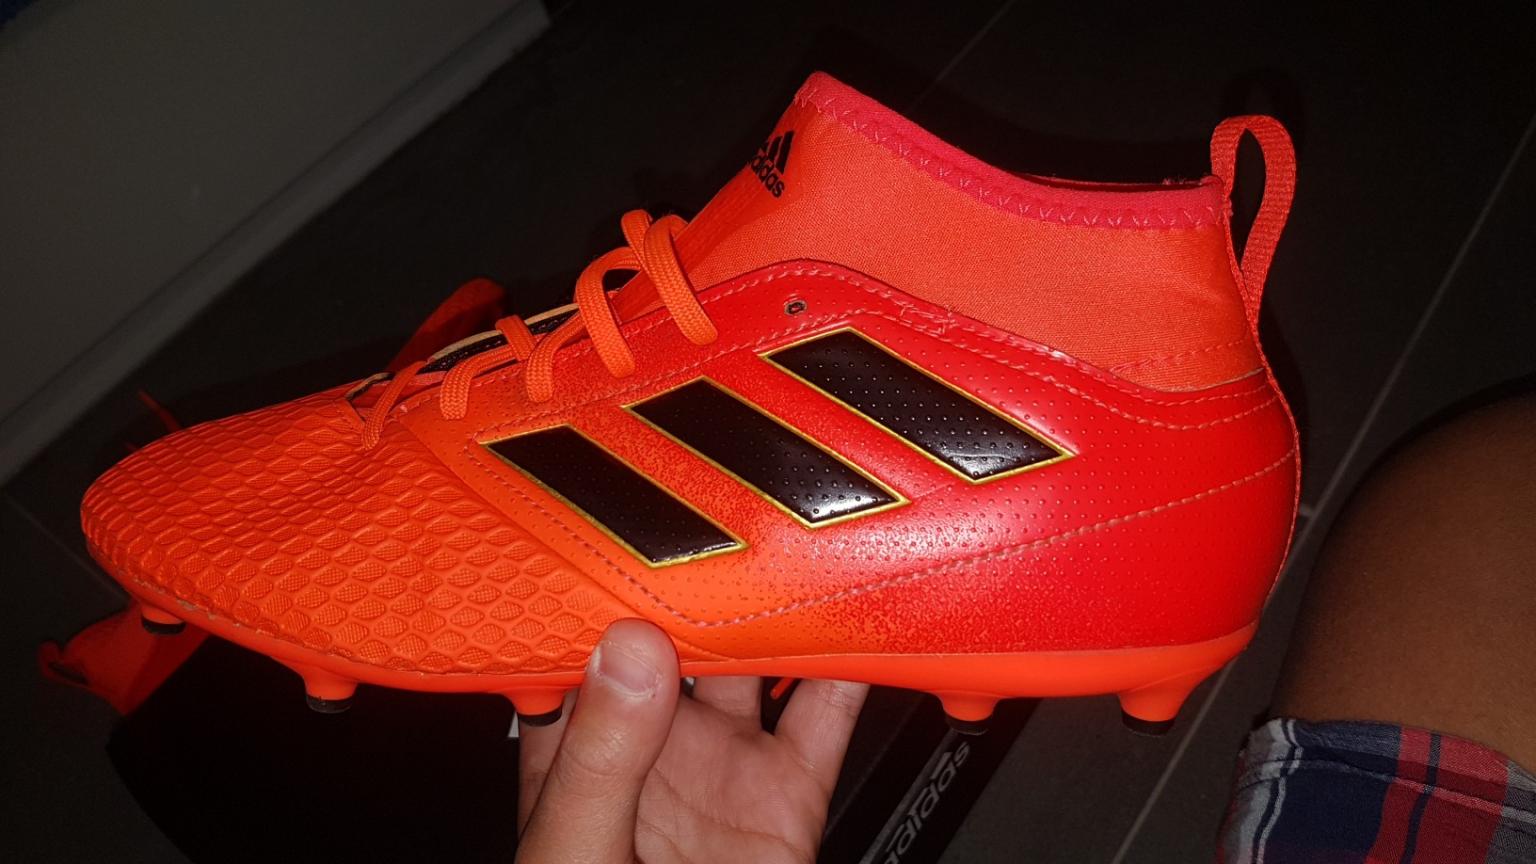 Adidas Orange Ace 17.3 size UK 5.5 in CF Cardiff for £19.99 for sale |  Shpock